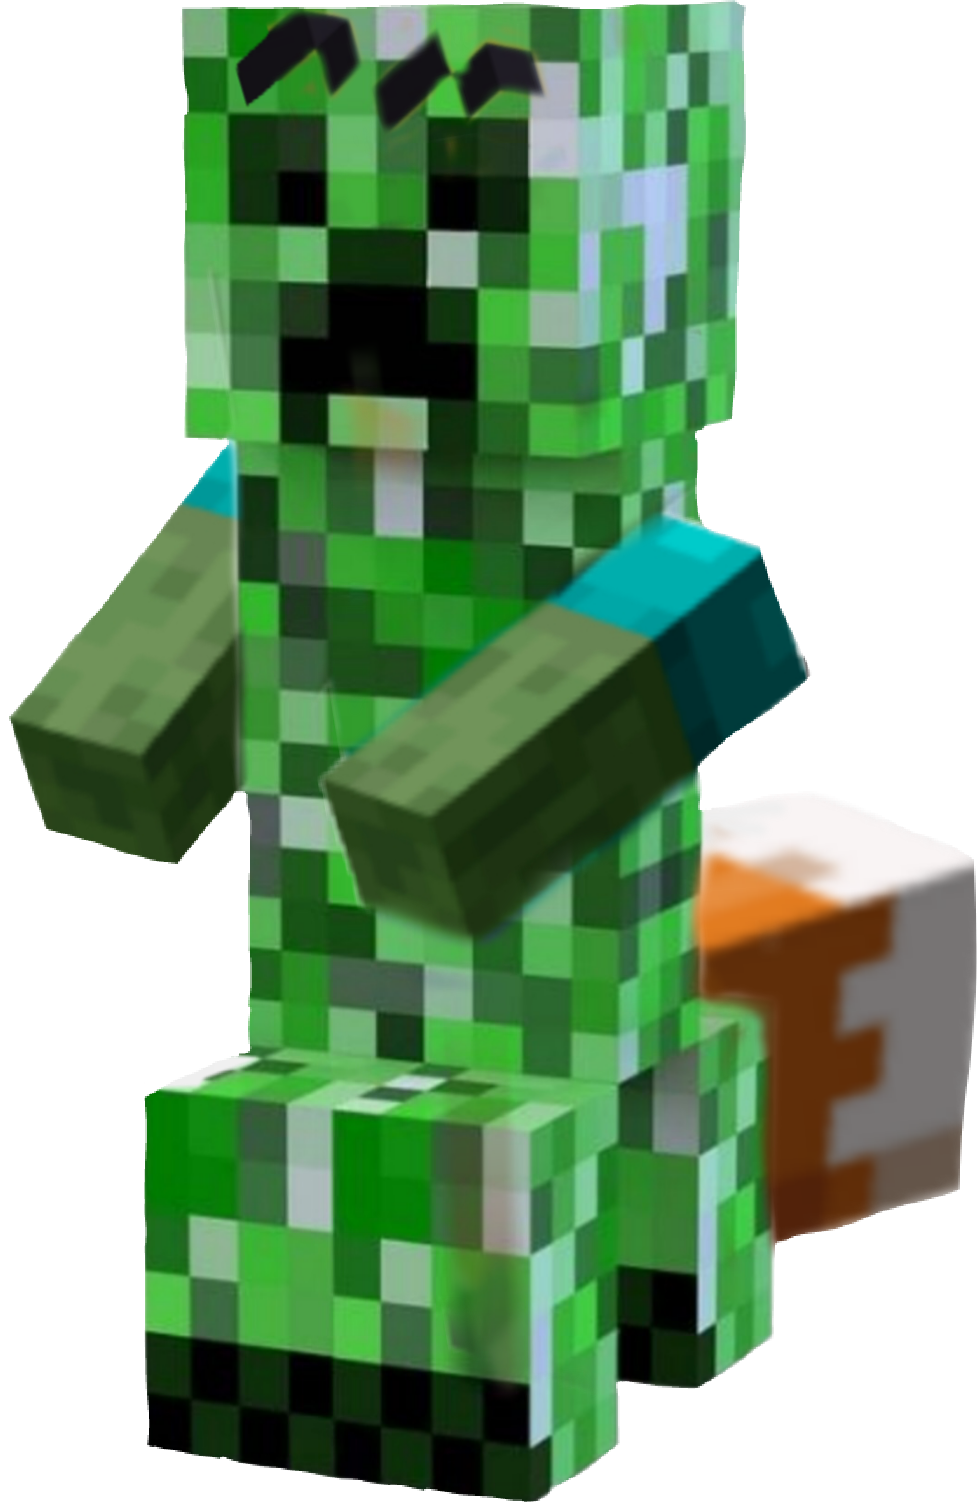 A Green And White Pixelated Animal